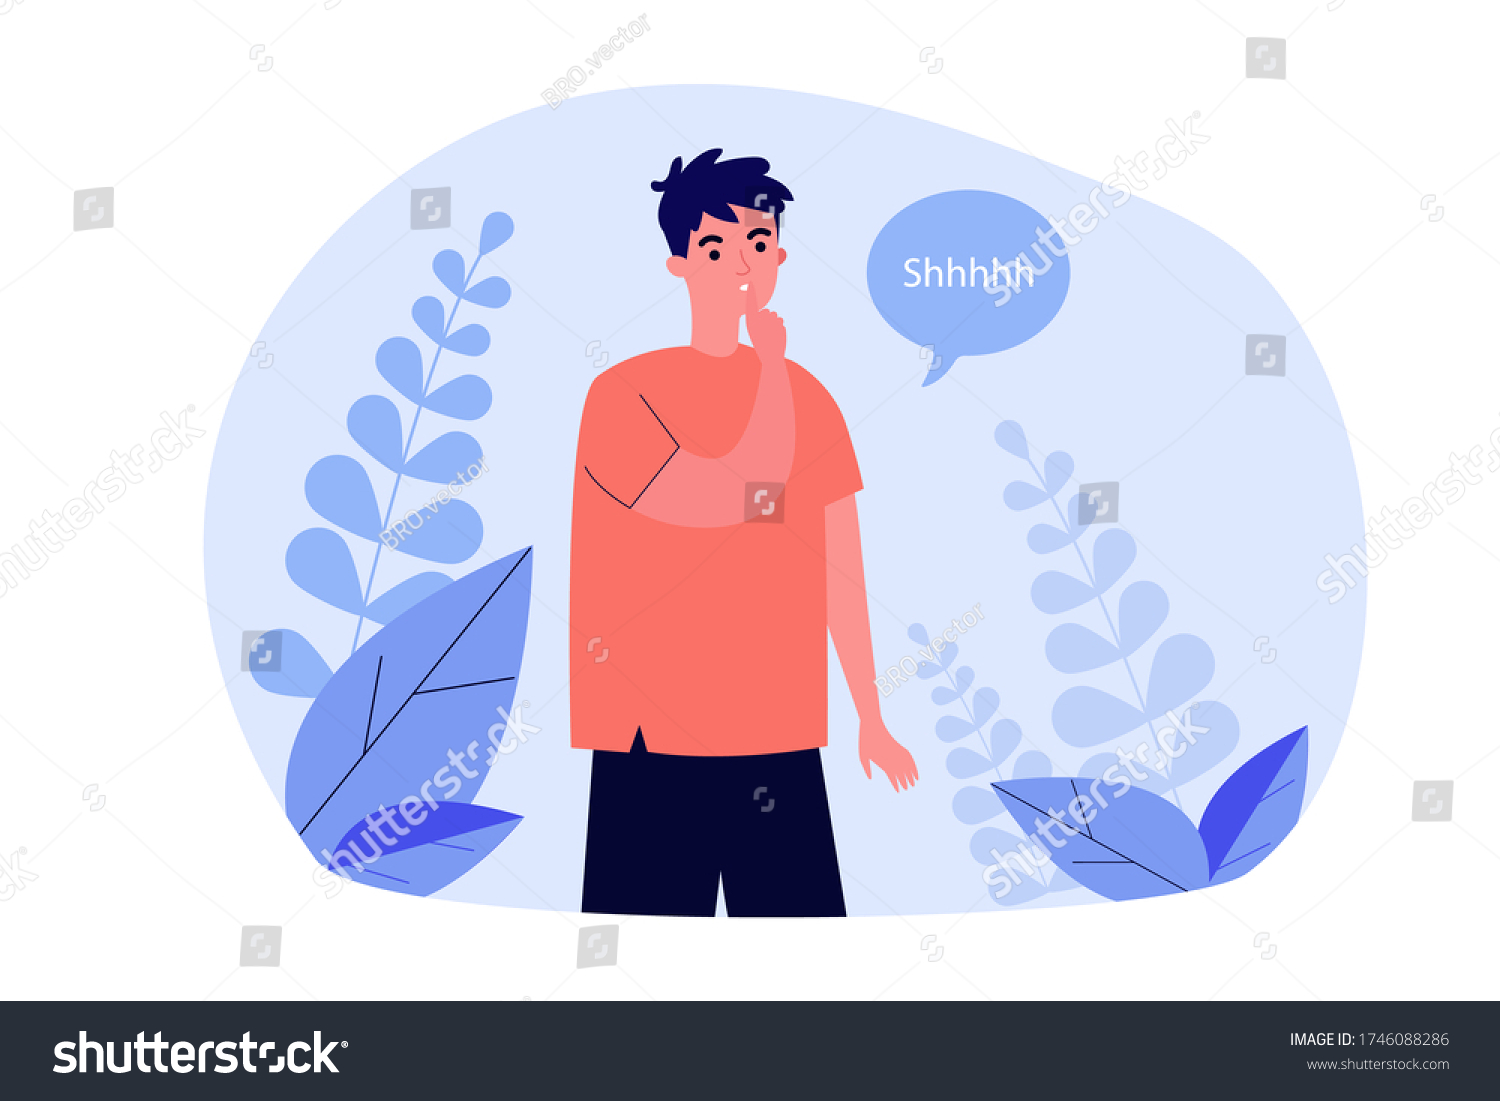 SVG of Young man showing shh or stop talking gesture, keeping secret and conspiracy. Flat vector illustration for silence, keeping quiet, secrecy concept svg